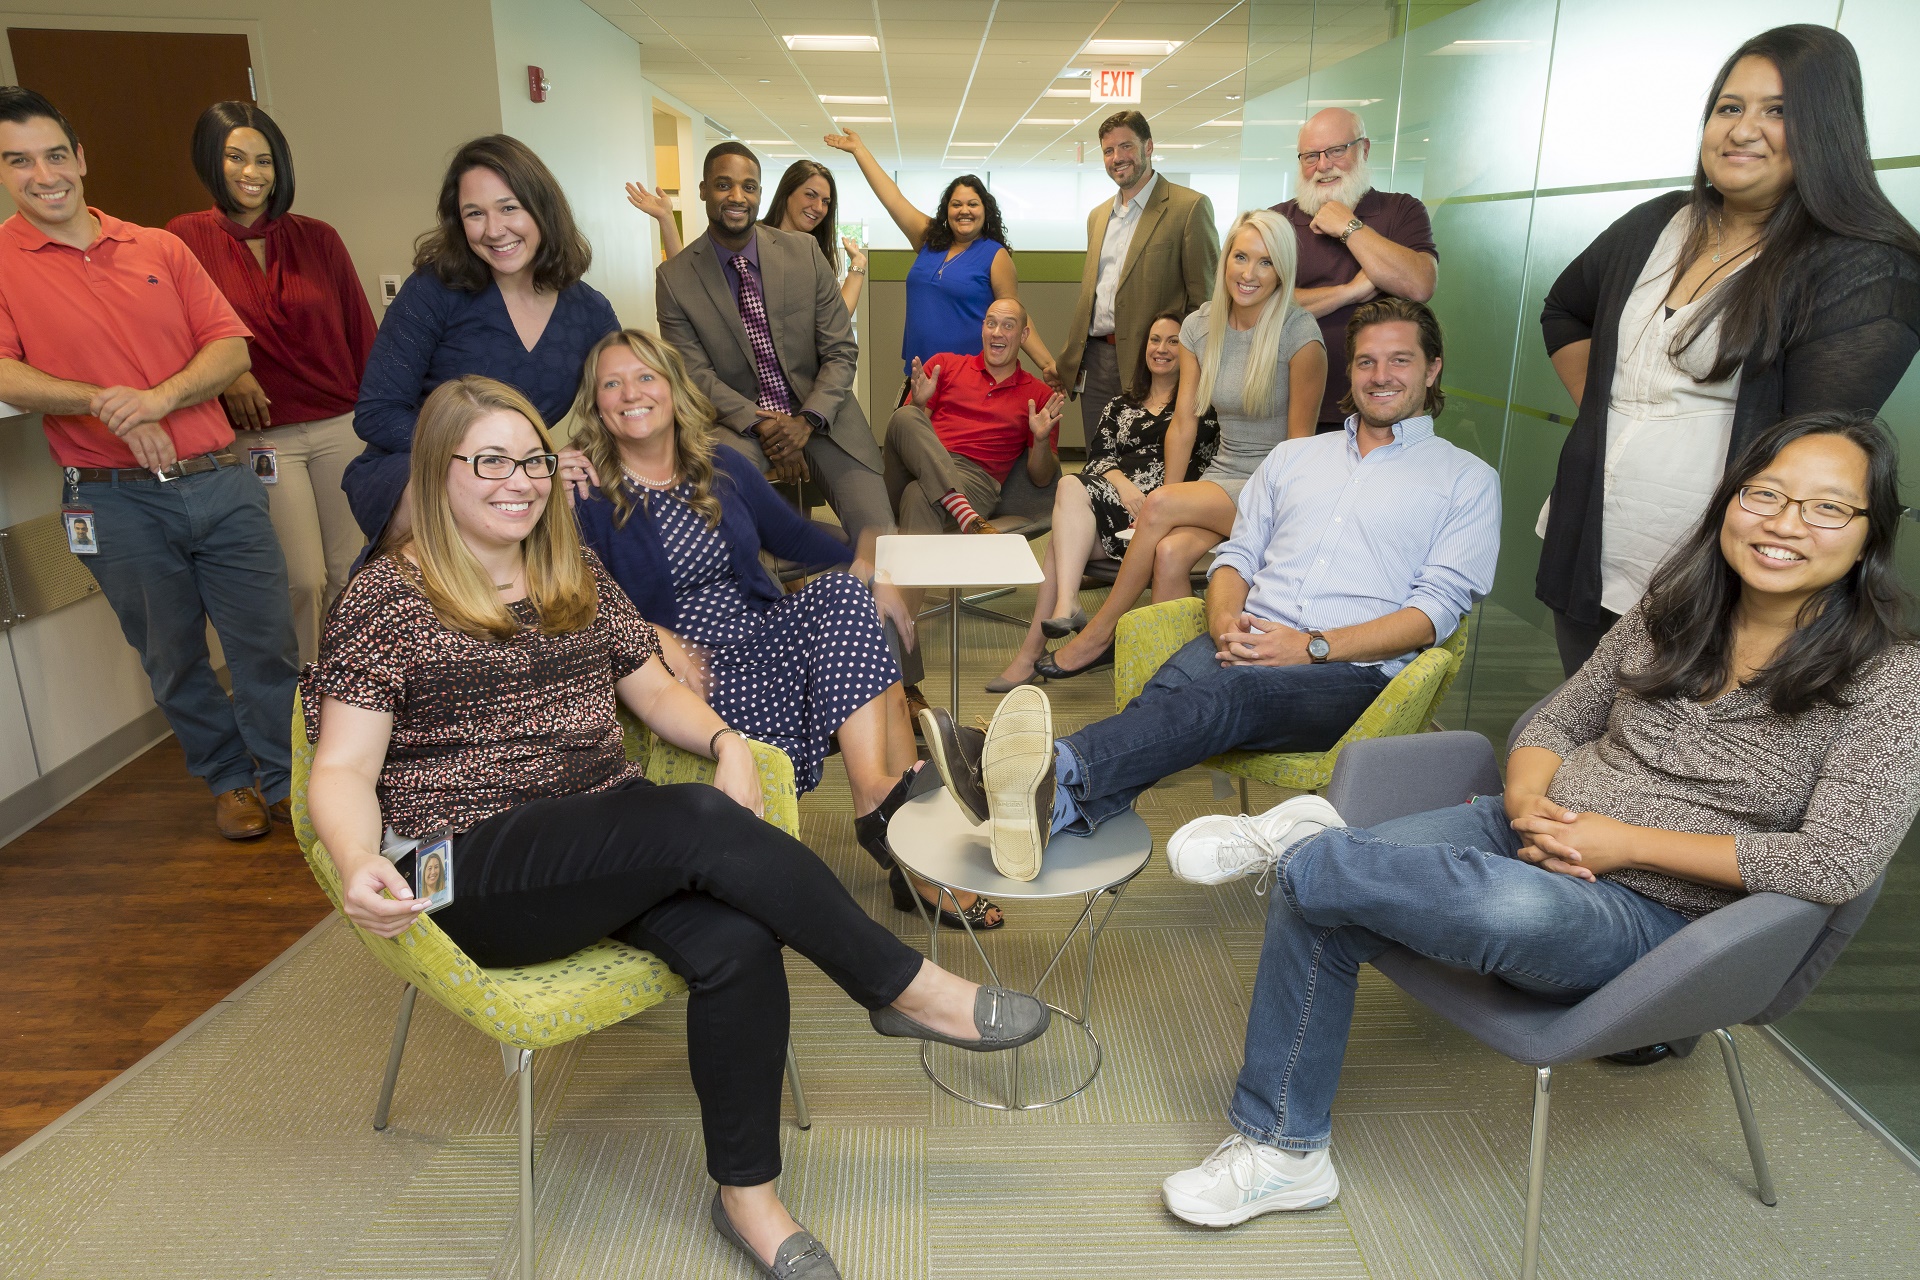 COCC employees gathered in a collaboration space smiling at the camera